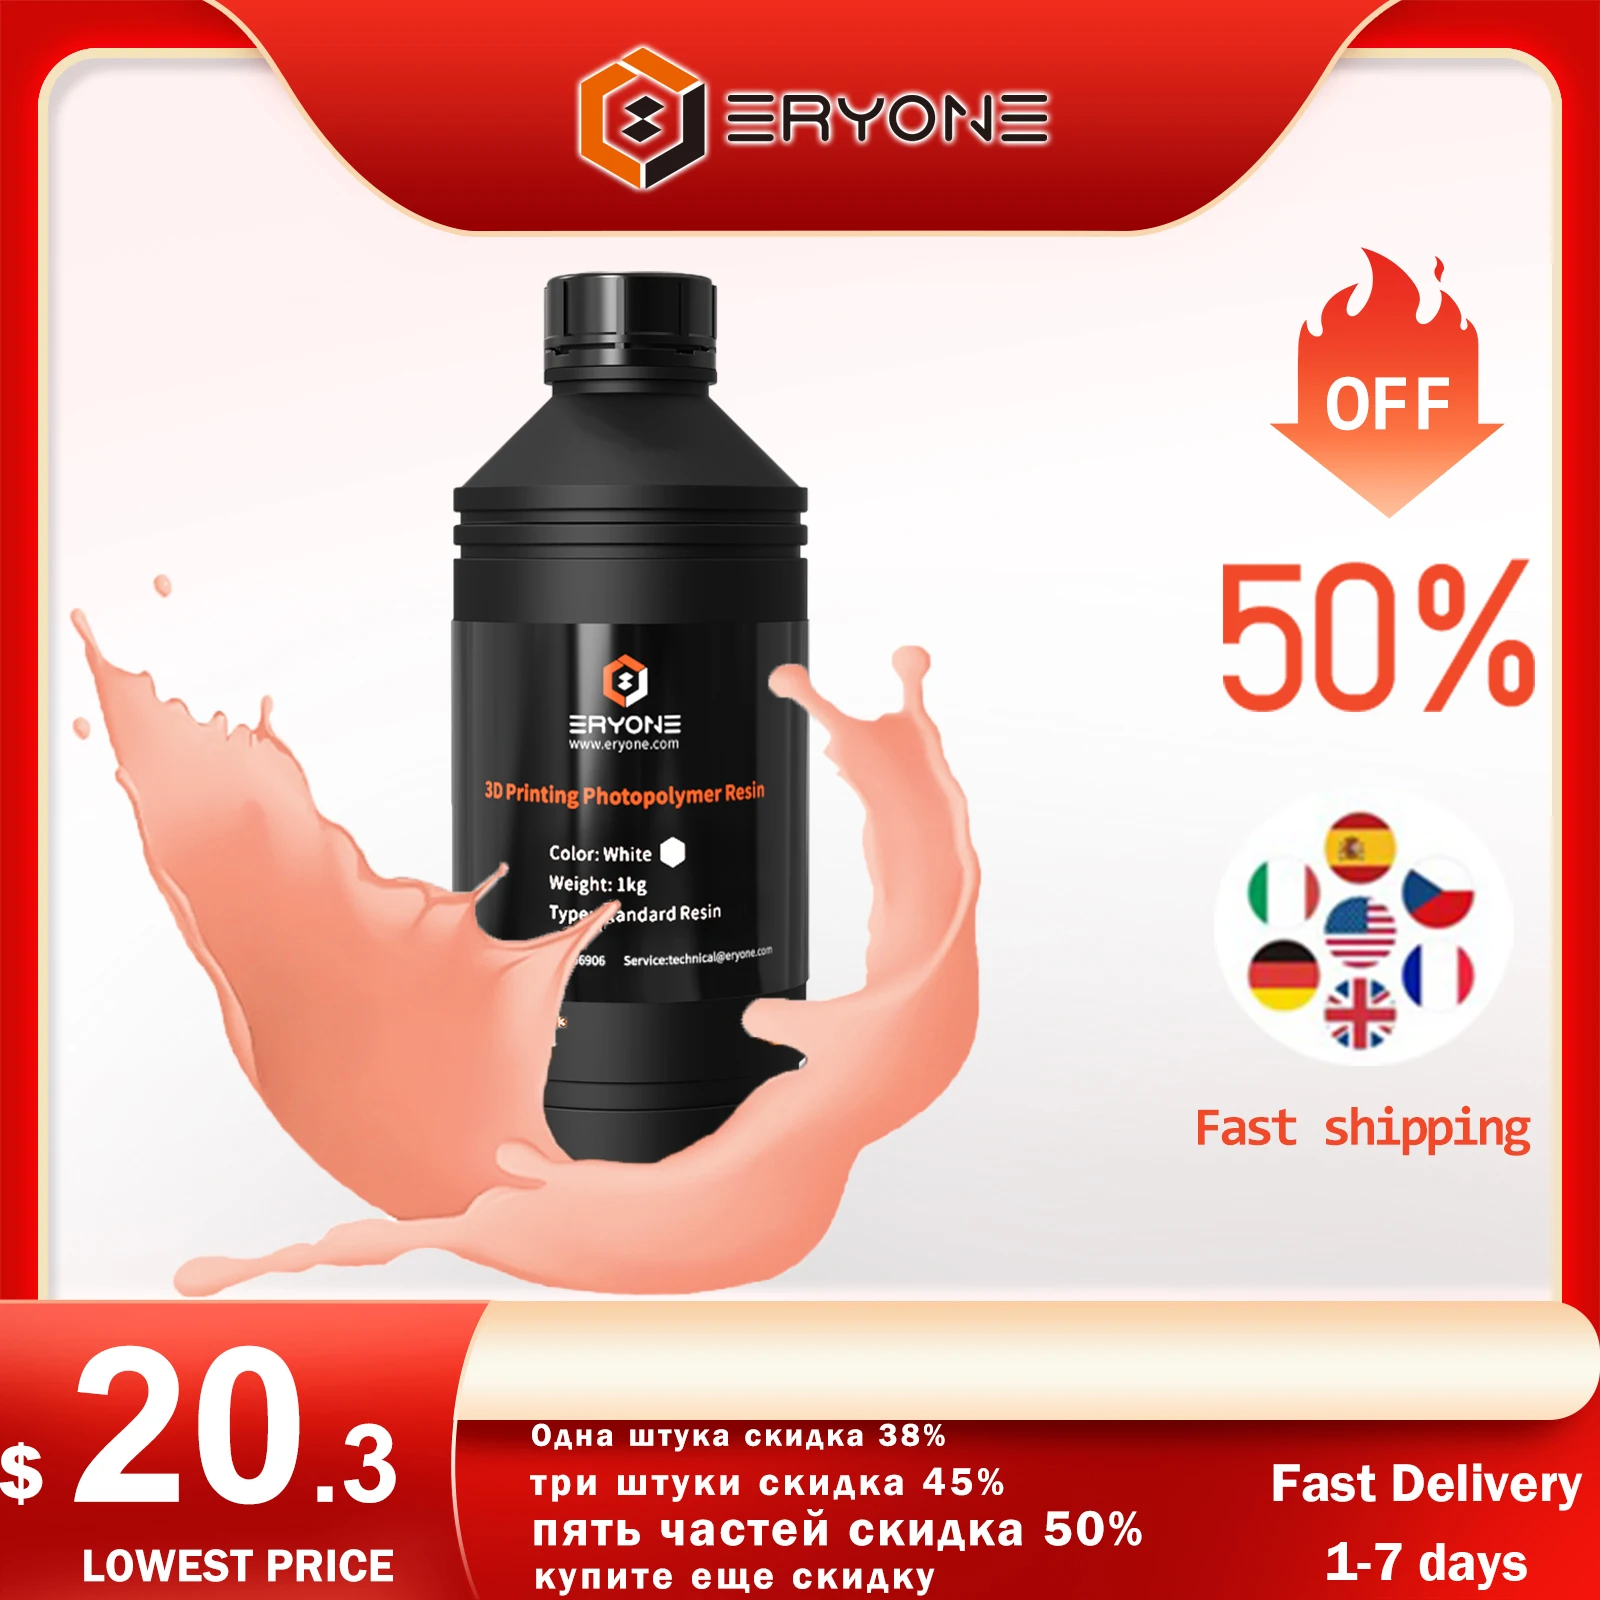 ERYONE 1KG Super Low Odor ABS Like Water Washable Resin 3D Printer Photopolymer 405nm UV Resin Collection Promotion New arrival